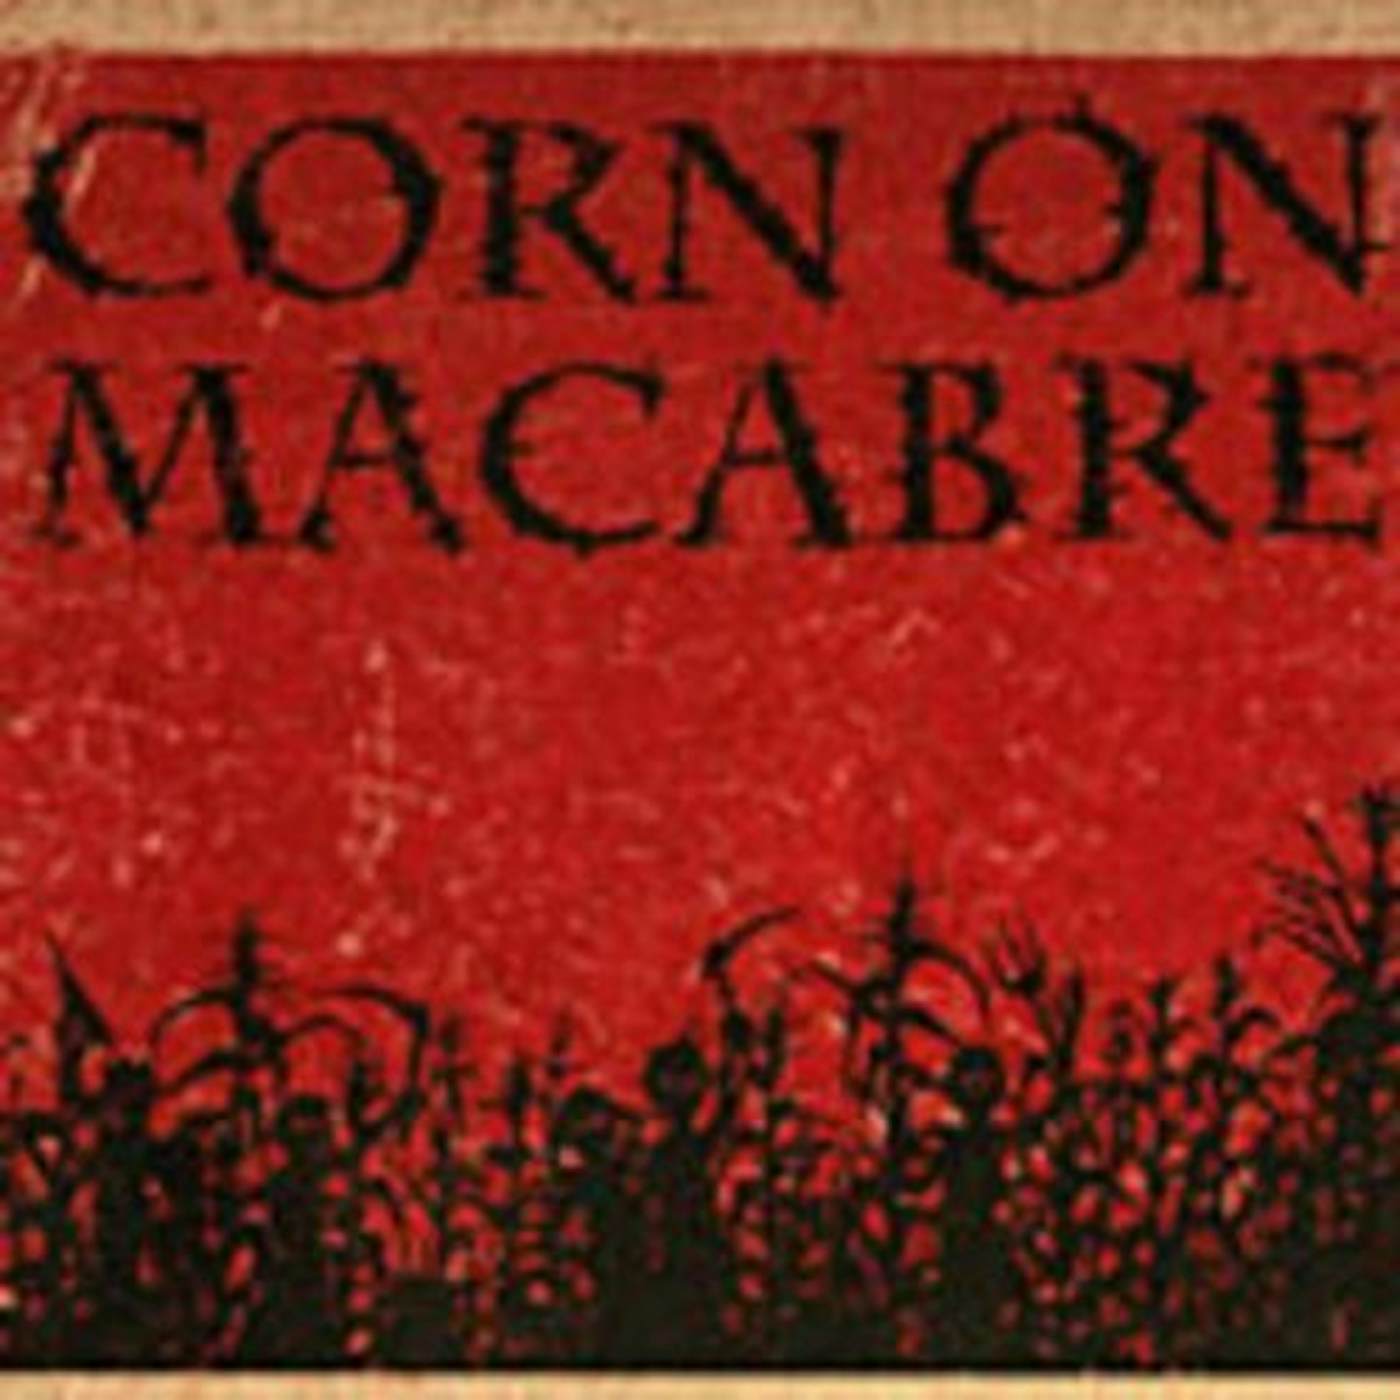 Corn on Macabre CHAPTERS 1 & 2 CD